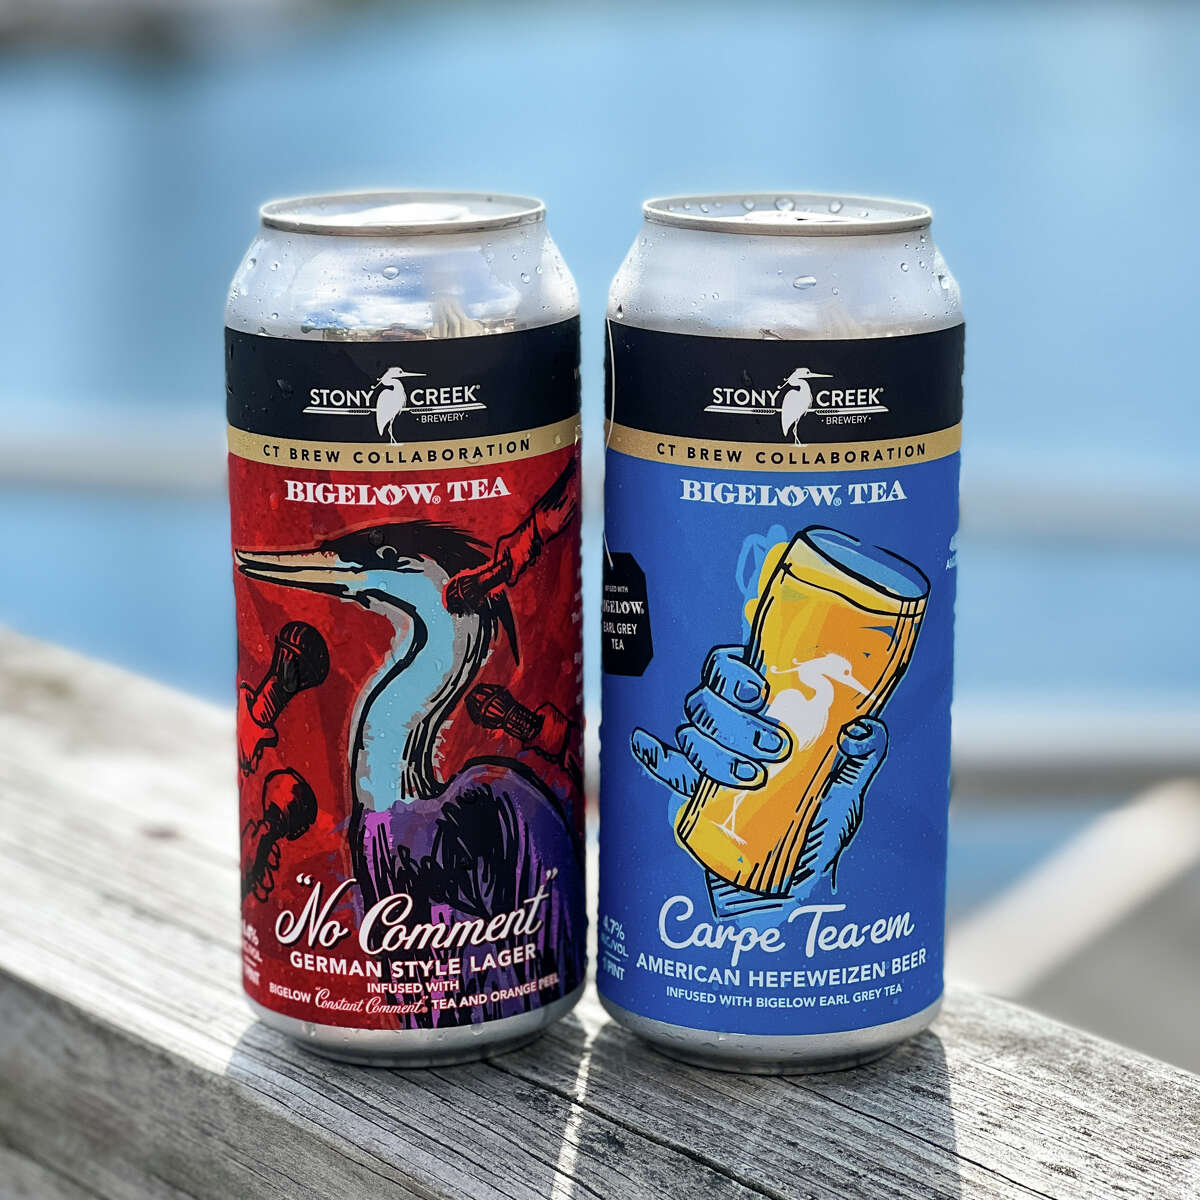 No Comment and Carpe Tea-em, the products of a collaboration between Bigelow Tea and Stony Creek Brewery.